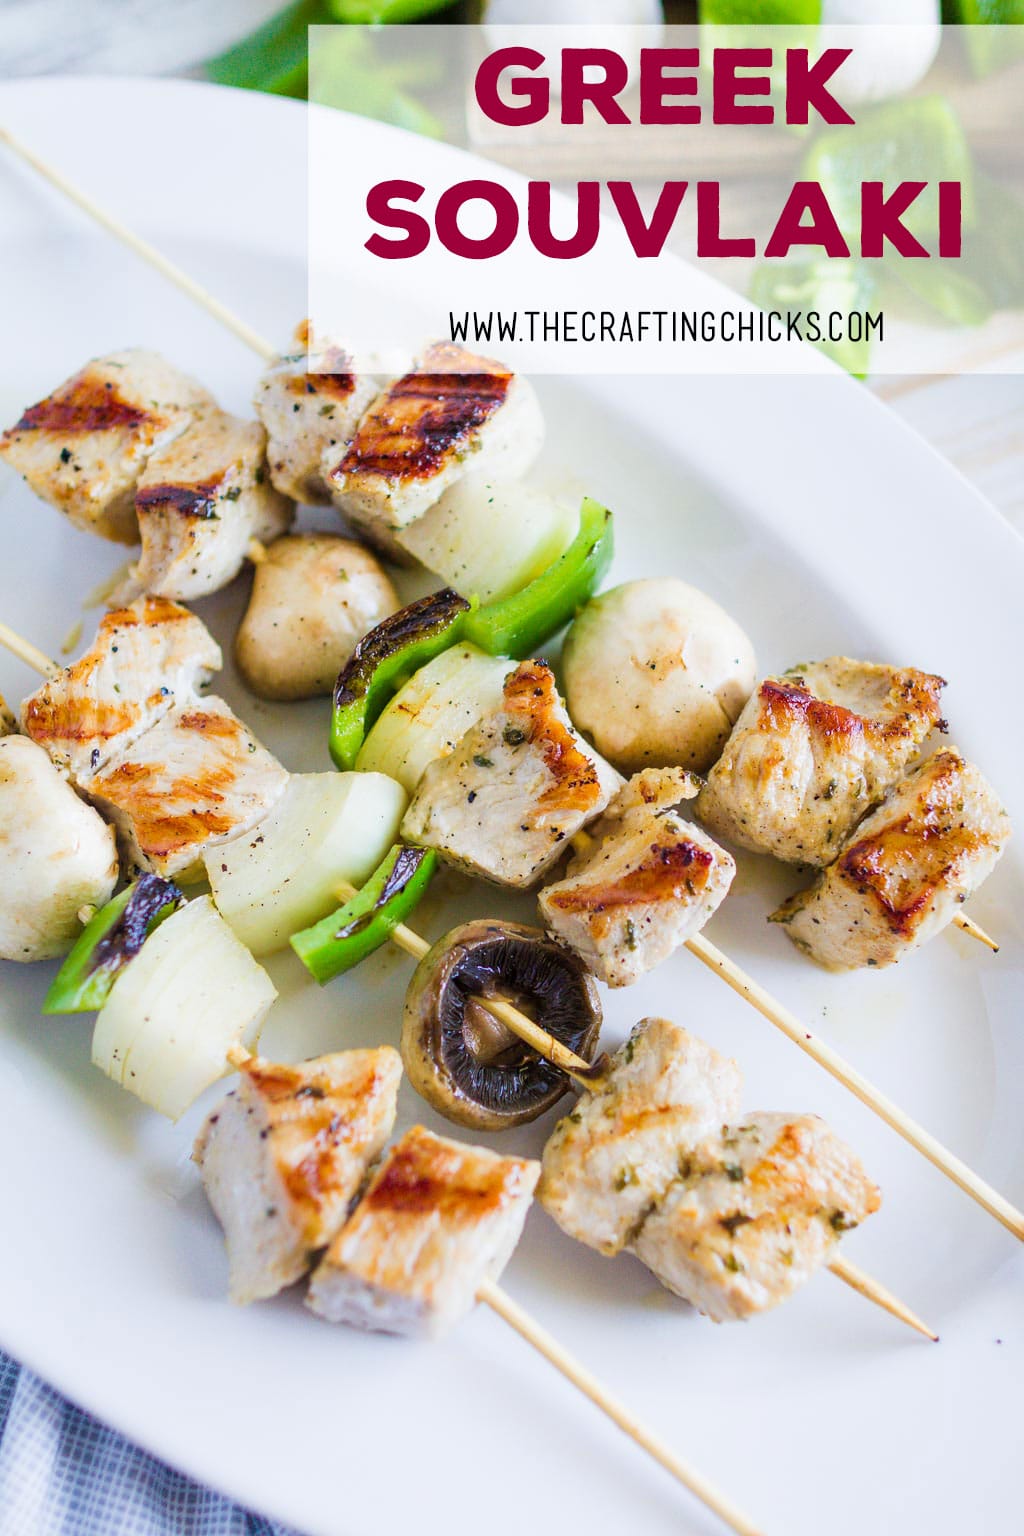 This easy Greek Pork Souvlaki Kebabs recipe is an family recipe that has been passed down. The marinade is an authentic Greek recipe that is easy to make. 